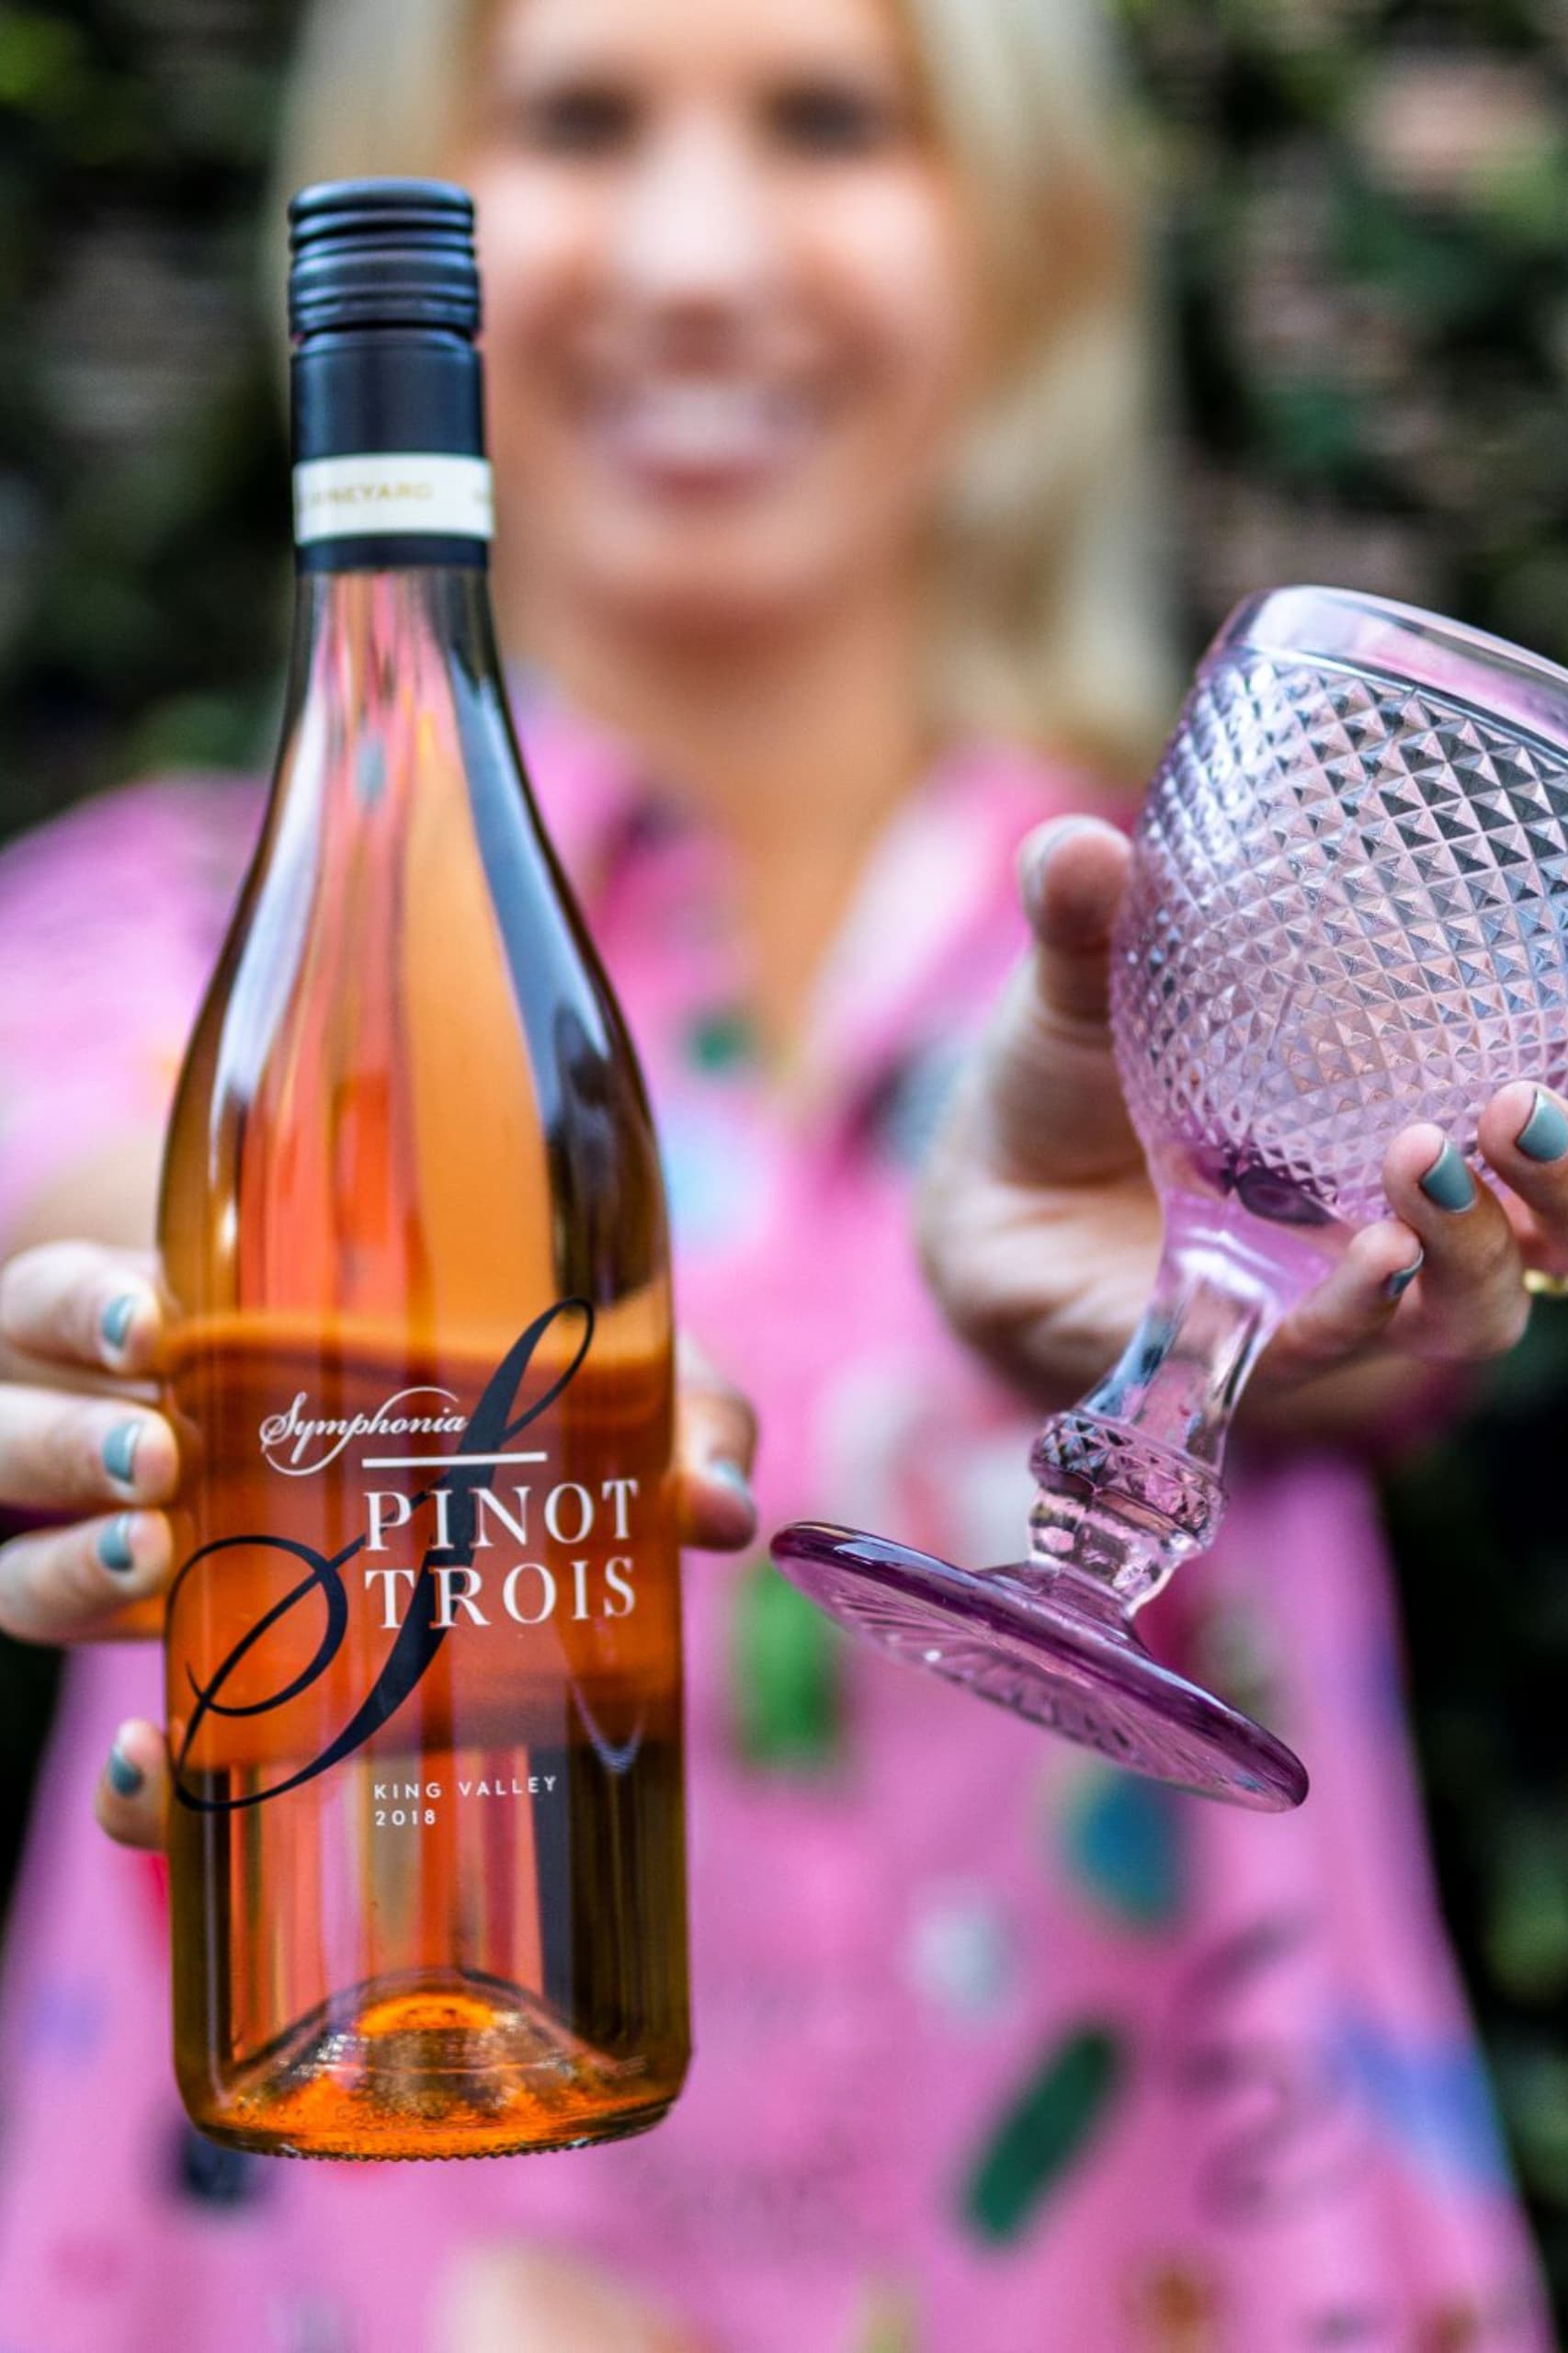 A woman holding a bottle of Pinot Trois from Symphonia Wines